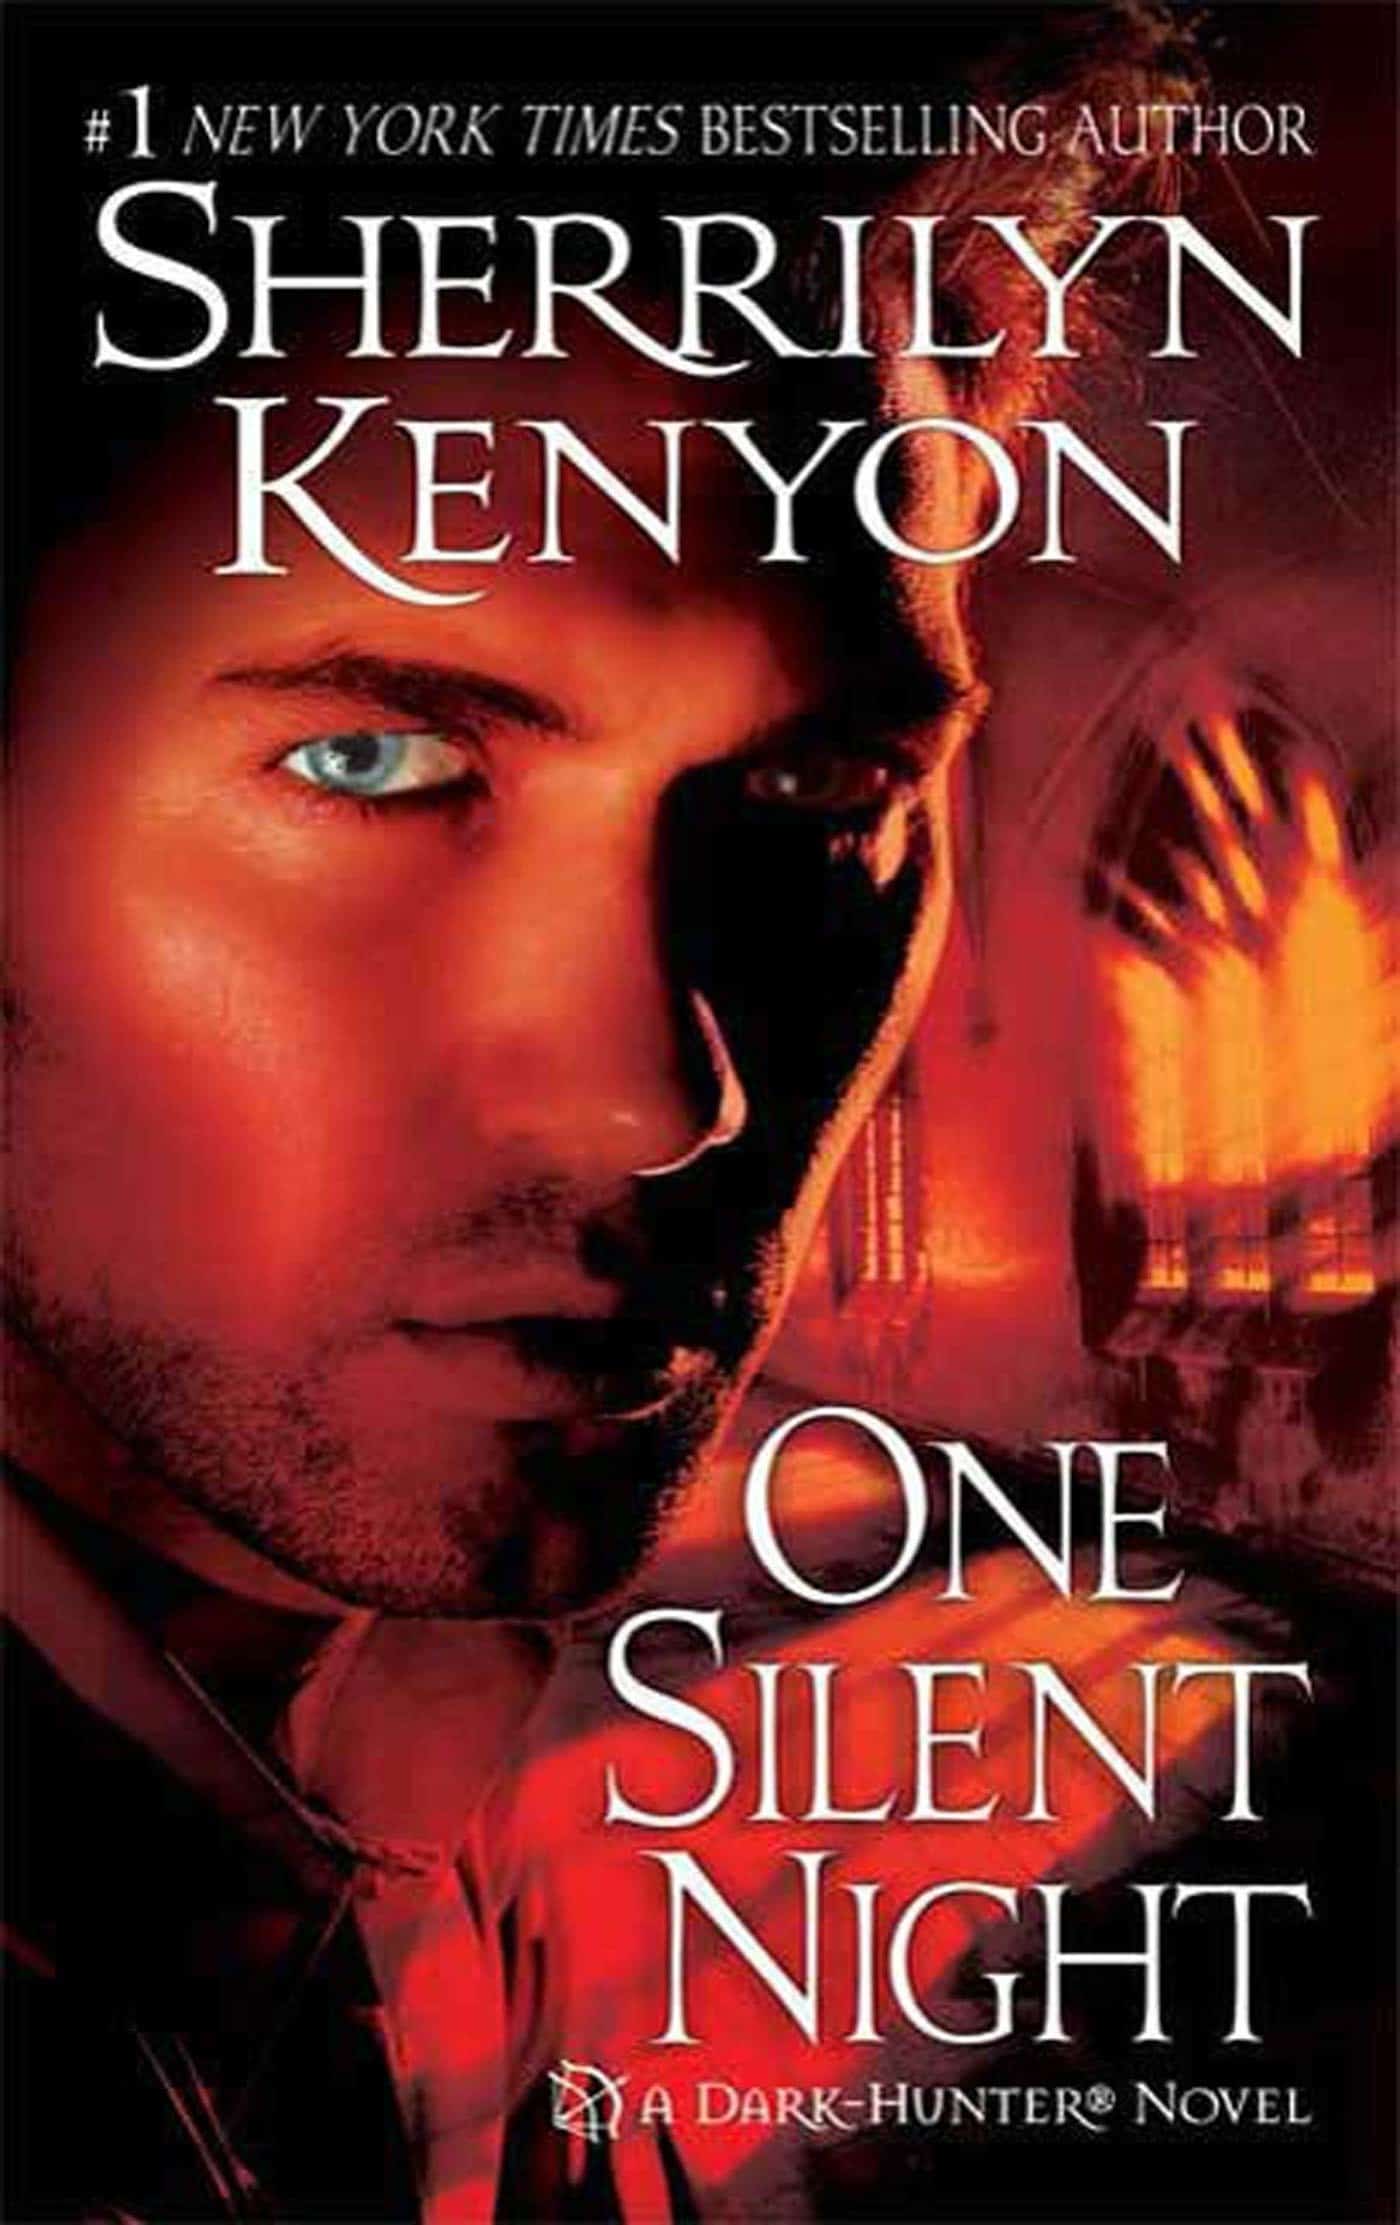 Cover for One Silent Night by Sherrilyn Kenyon